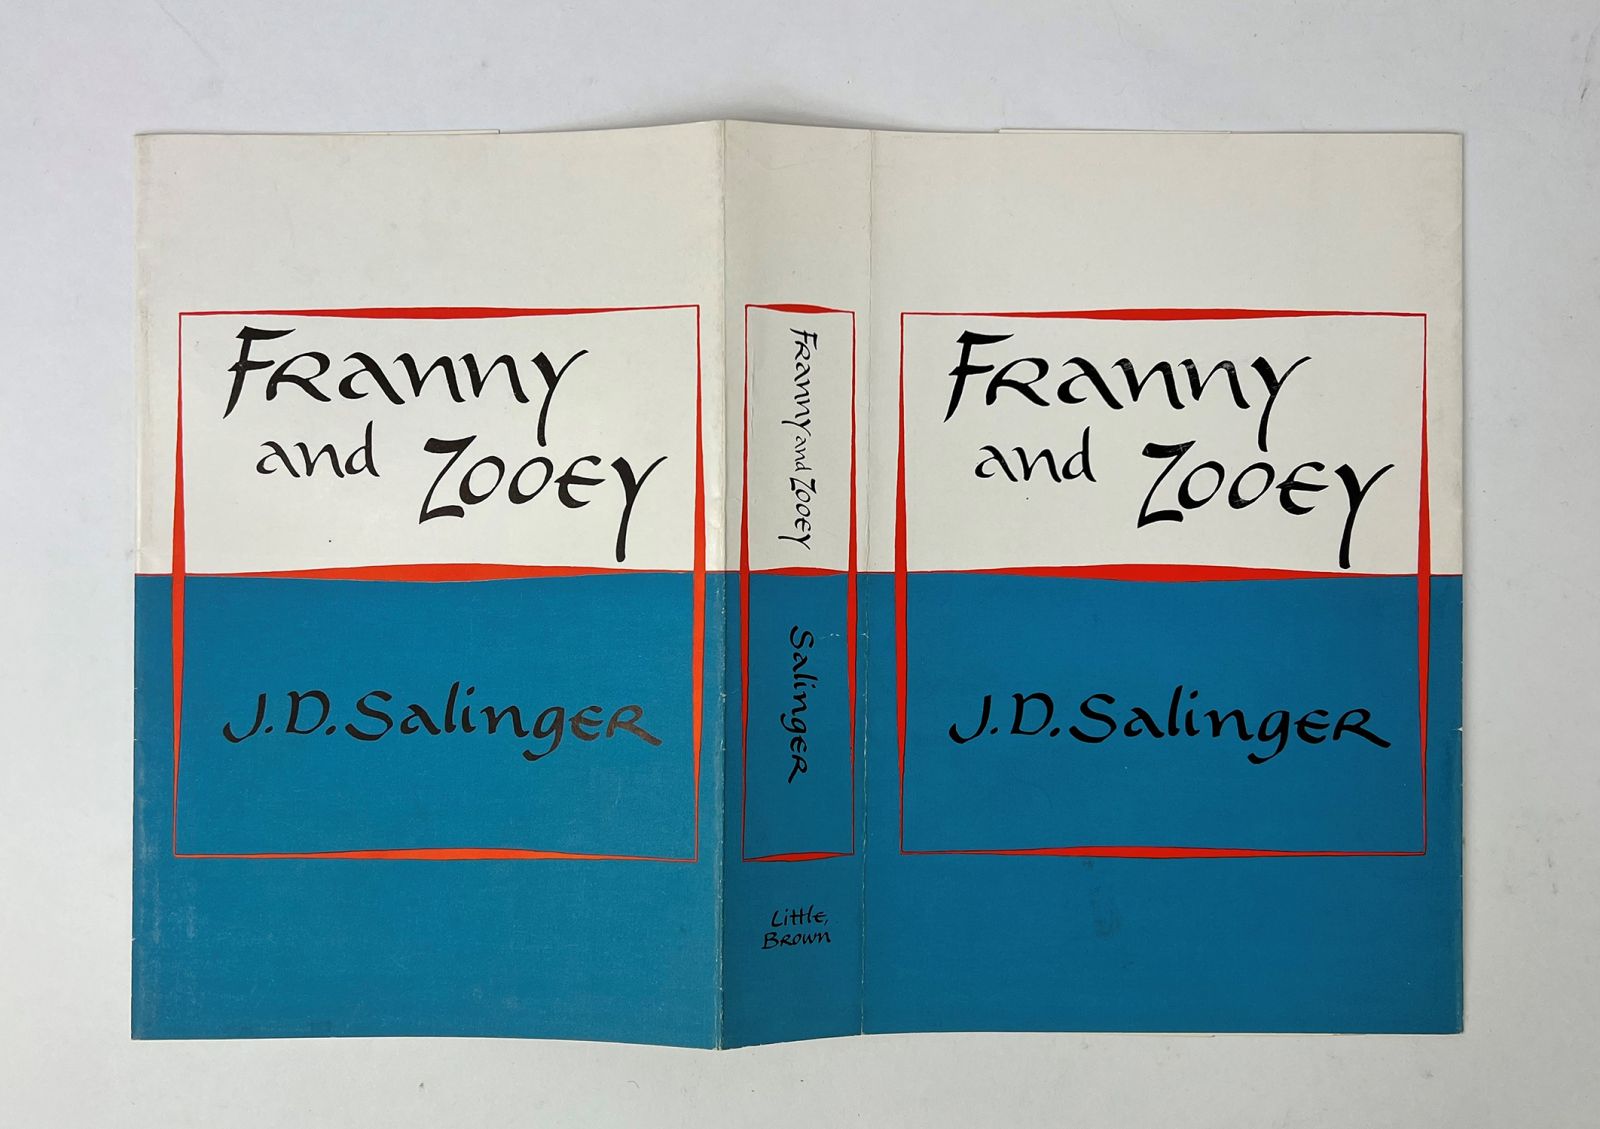 FRANNY AND ZOOEY - Original Dustwrapper Artwork - INSCRIBED BY THE AUTHOR. -  image 3